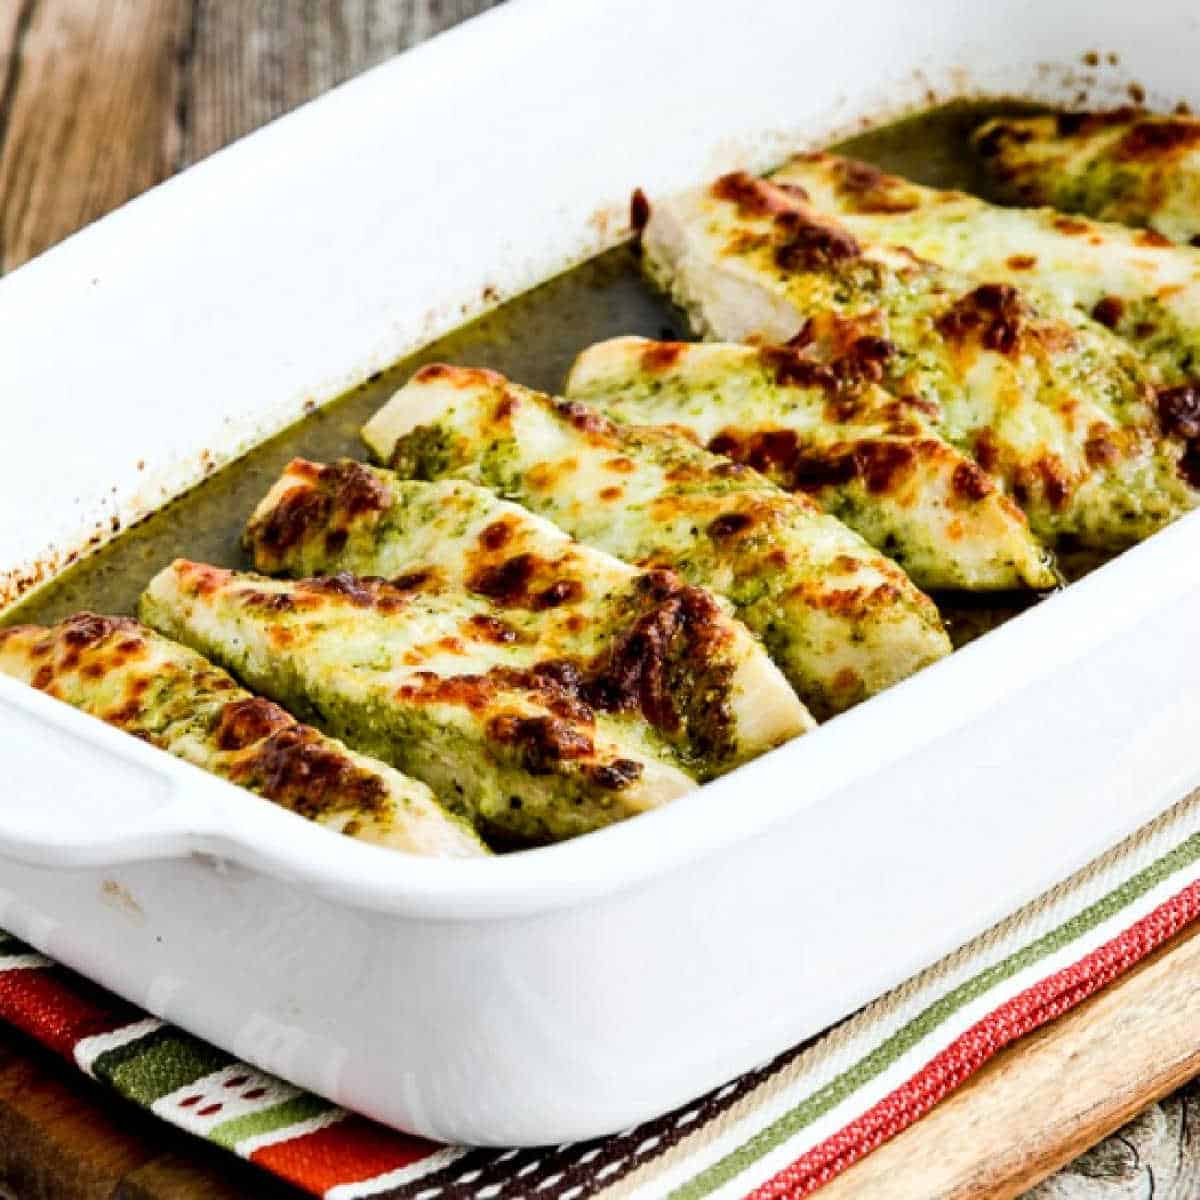 square image of Easy Baked Pesto Chicken in baking dish on striped napkin